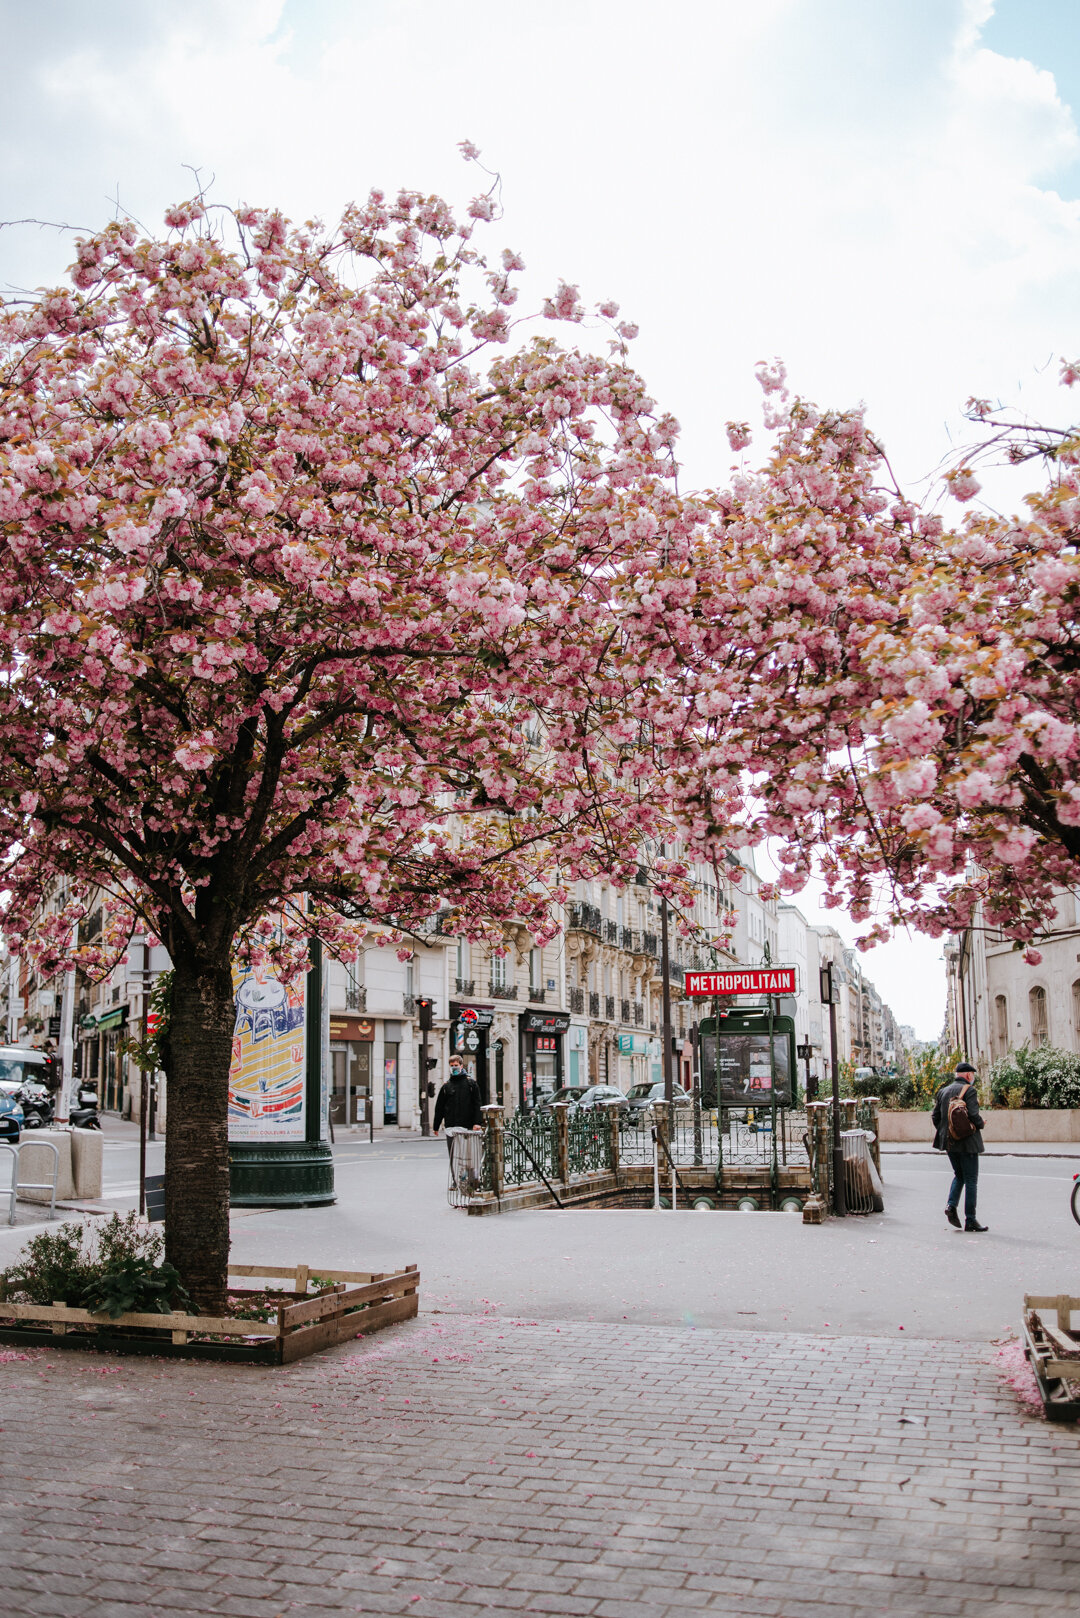 Where to find cherry blossoms in paris